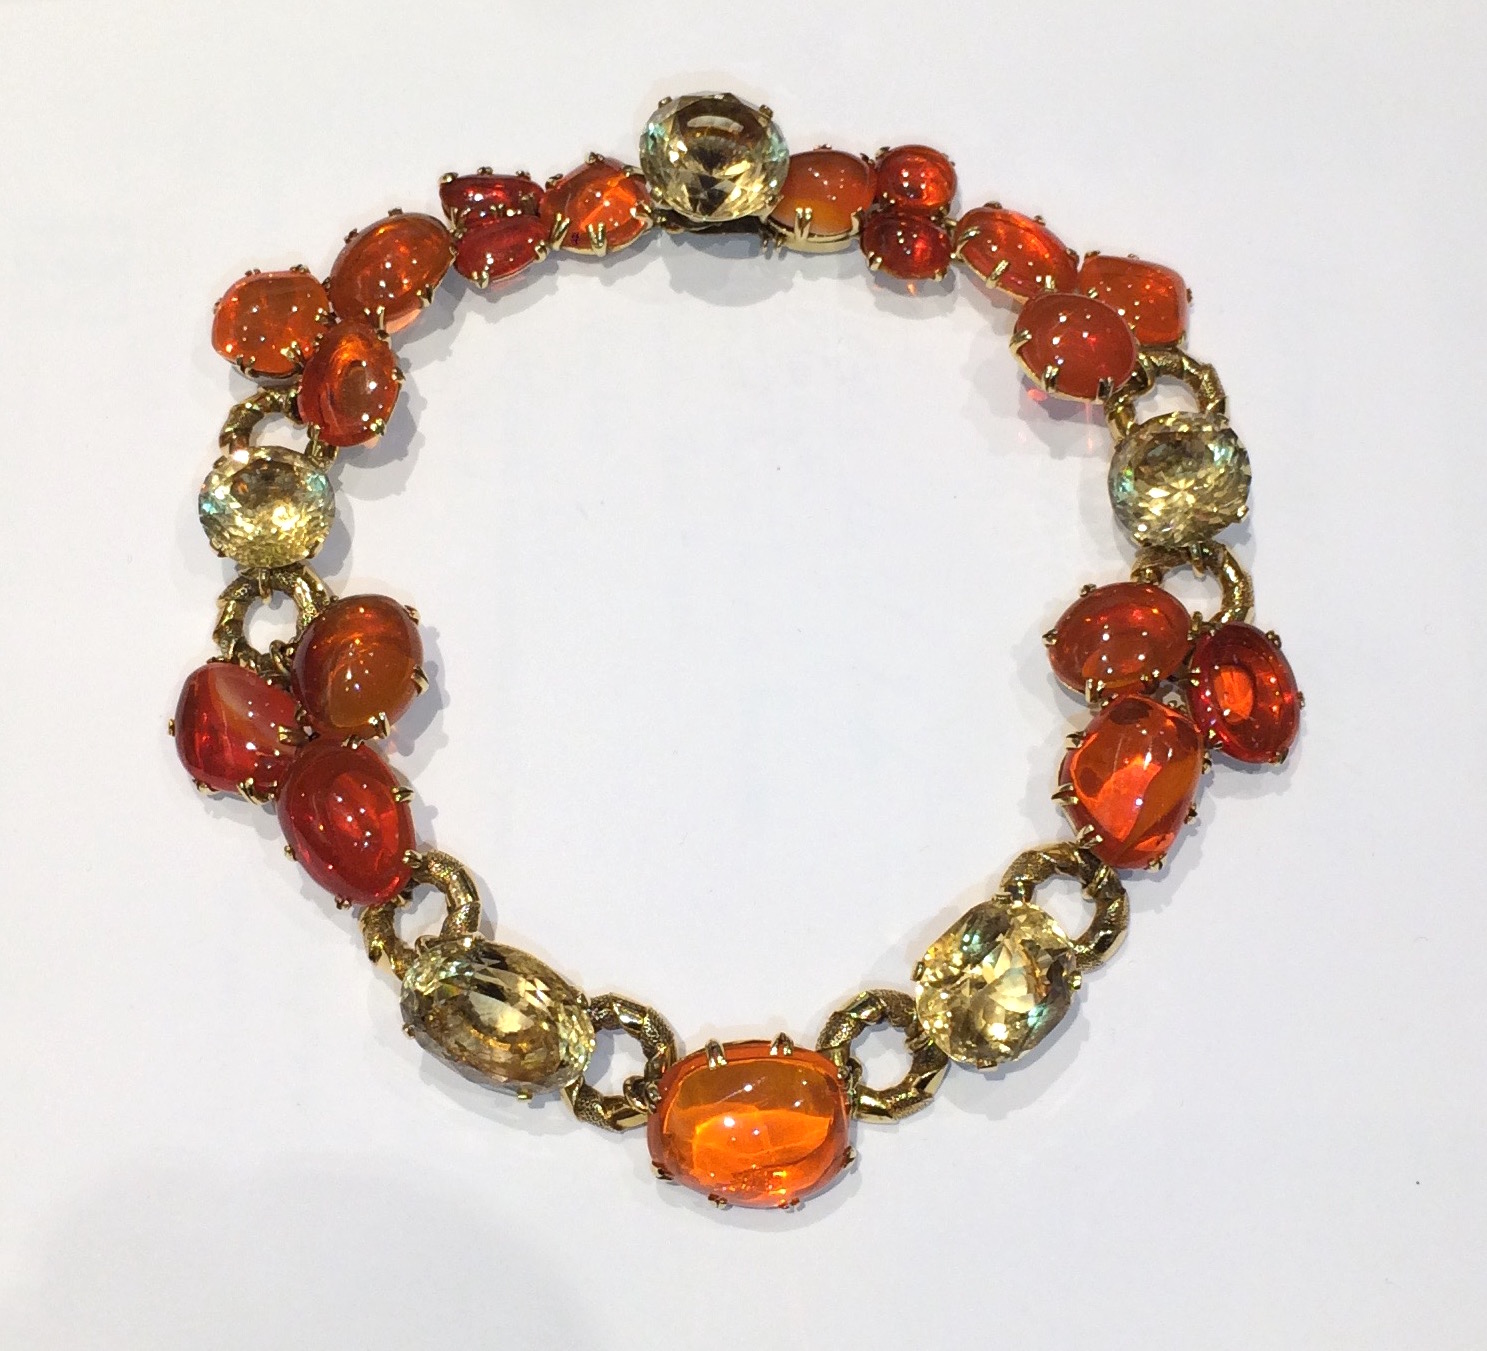 1940’s jeweled necklace, 18k gold textured ring links and elaborate bezel set 19 large cabochon fire opals (approx. 260 carats TW, ranging in sizes from 4 carats to 32 carats each) and further set with two oval cut citrines and three round cut citrines (approx. 145 carats TW, ranging in sizes from 22 carats to 36 carats each) c.1940